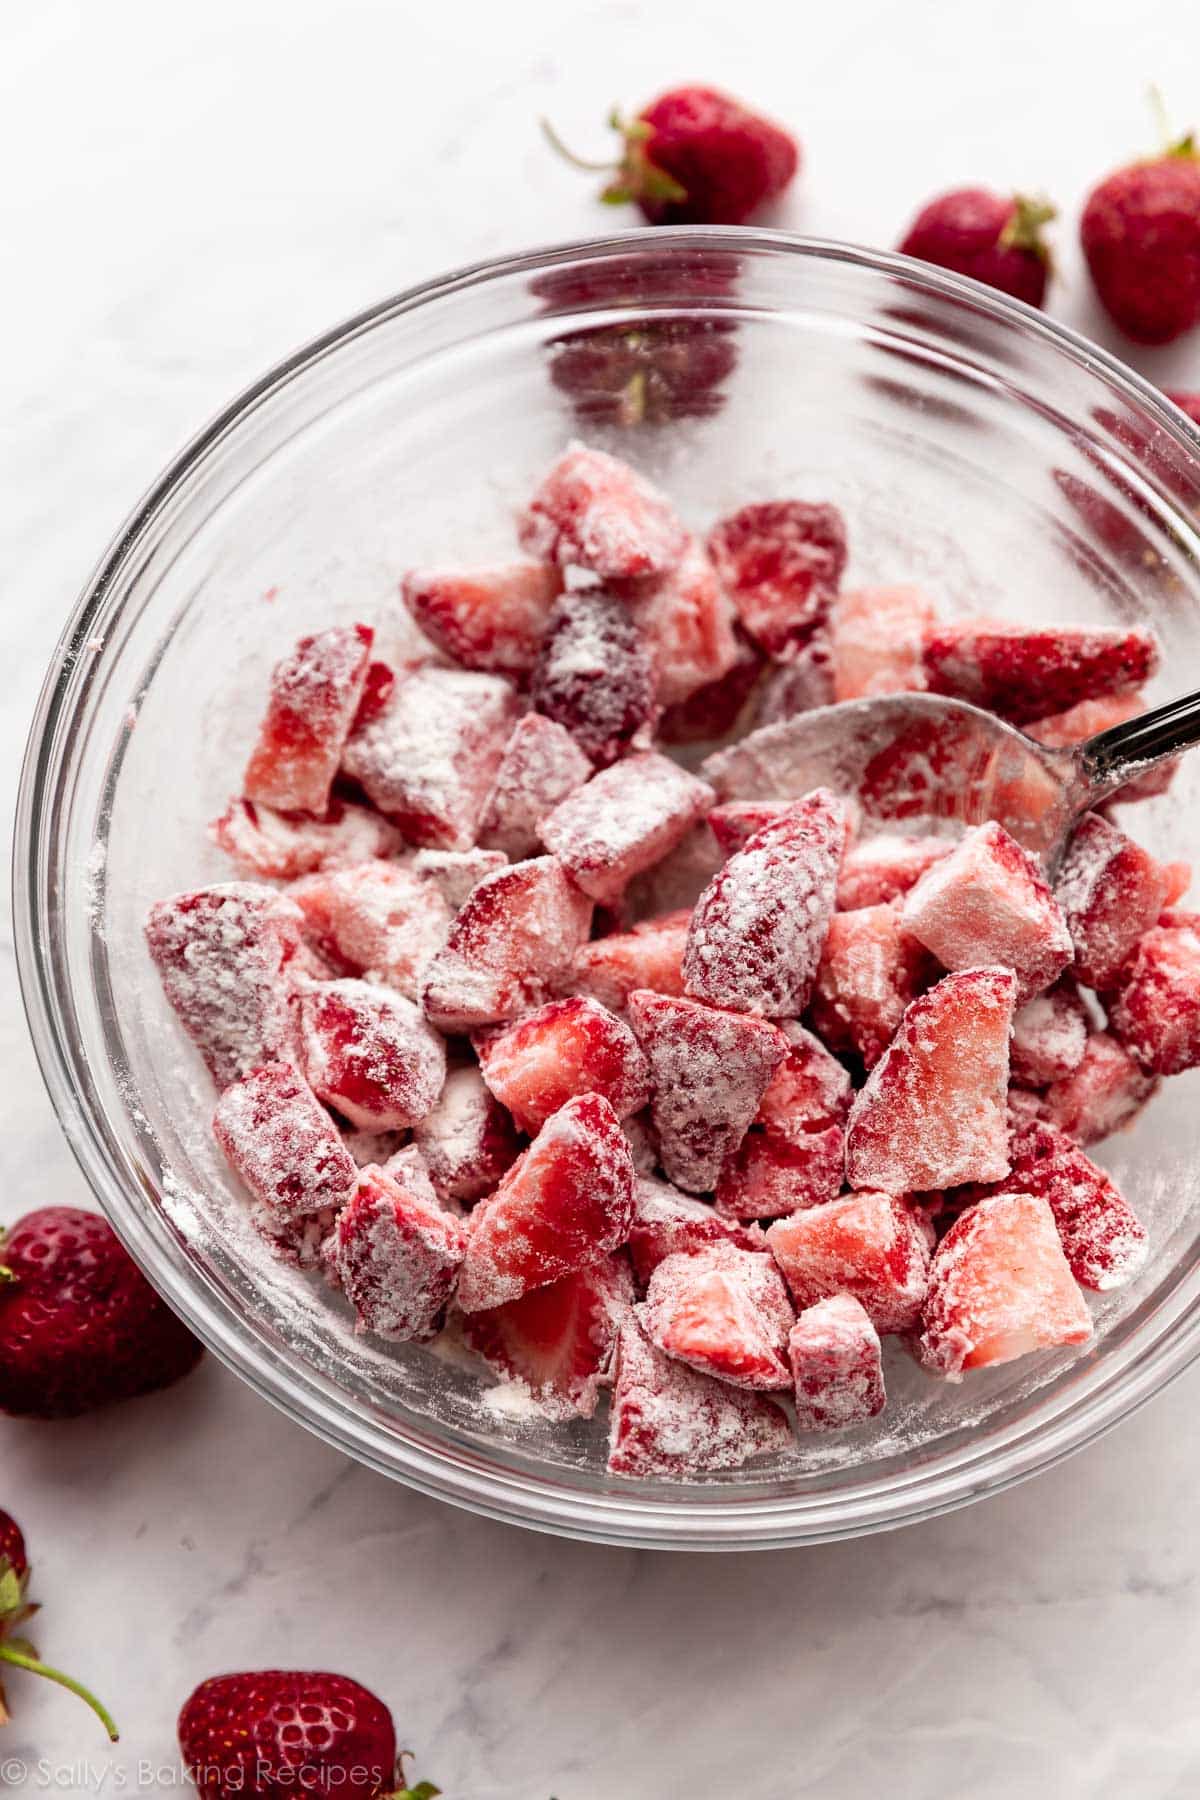 flour-dusted strawberries in glass bowl.